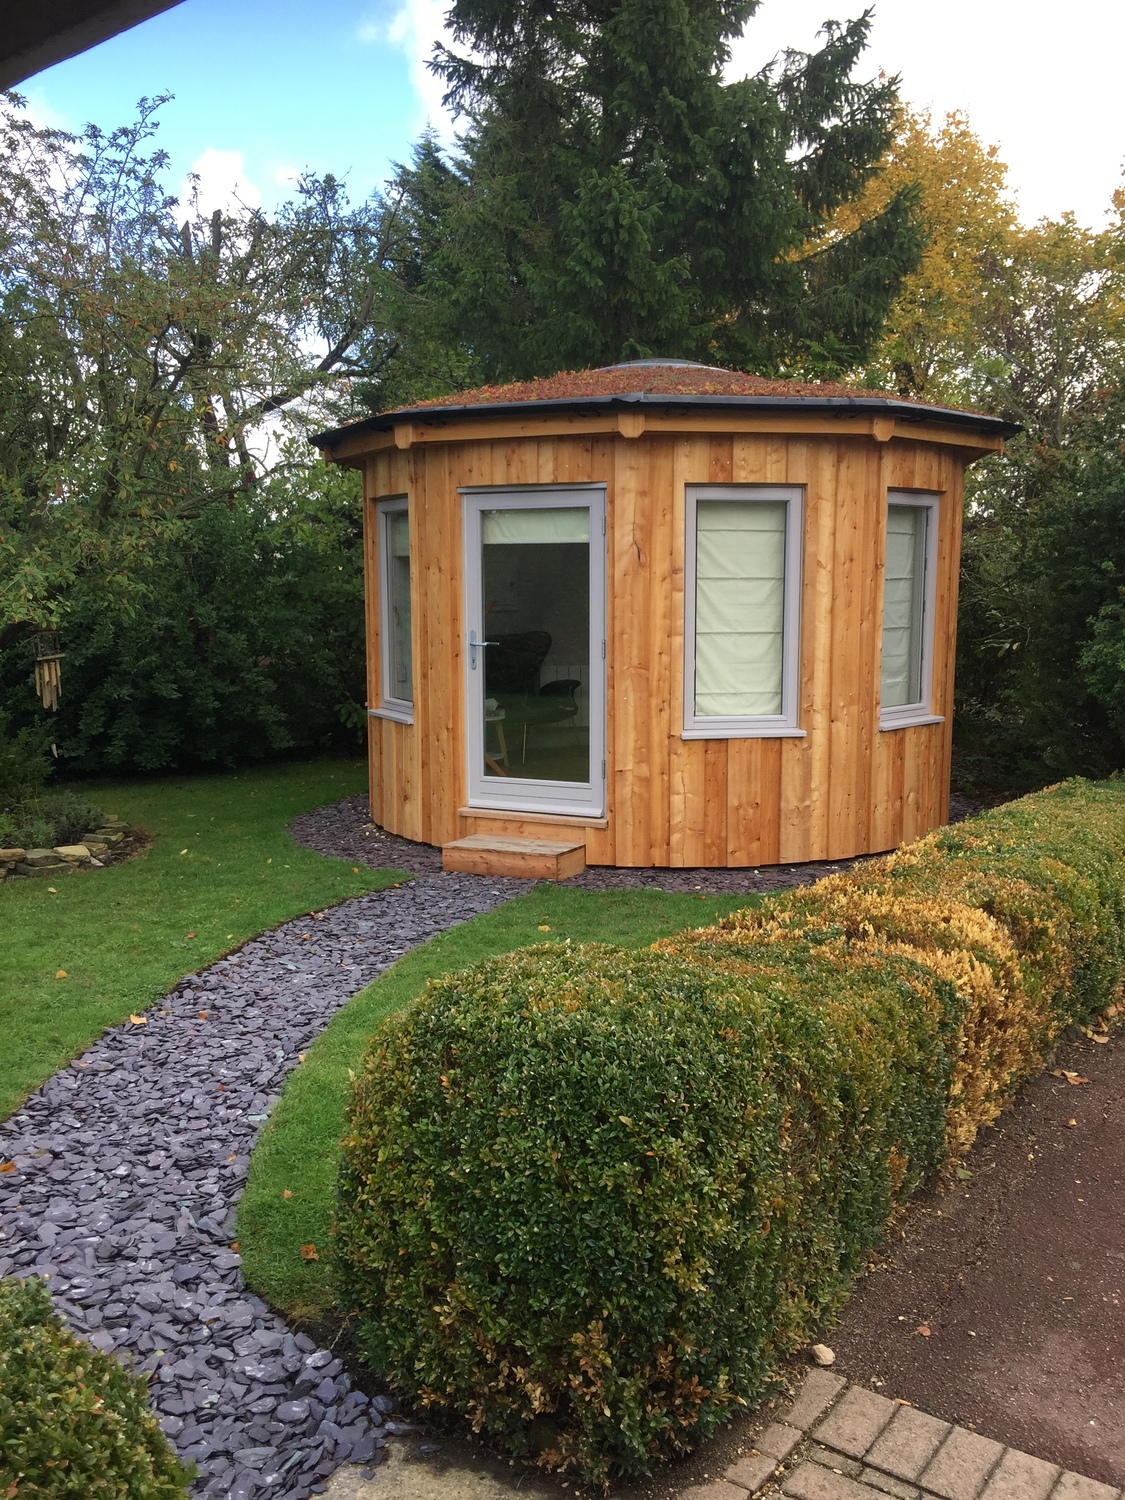 Gallery Photo of My Roundhouse offers a holistic space.  This eco space is built with well-being in mind.  I hope you feel invigorated being in the round!